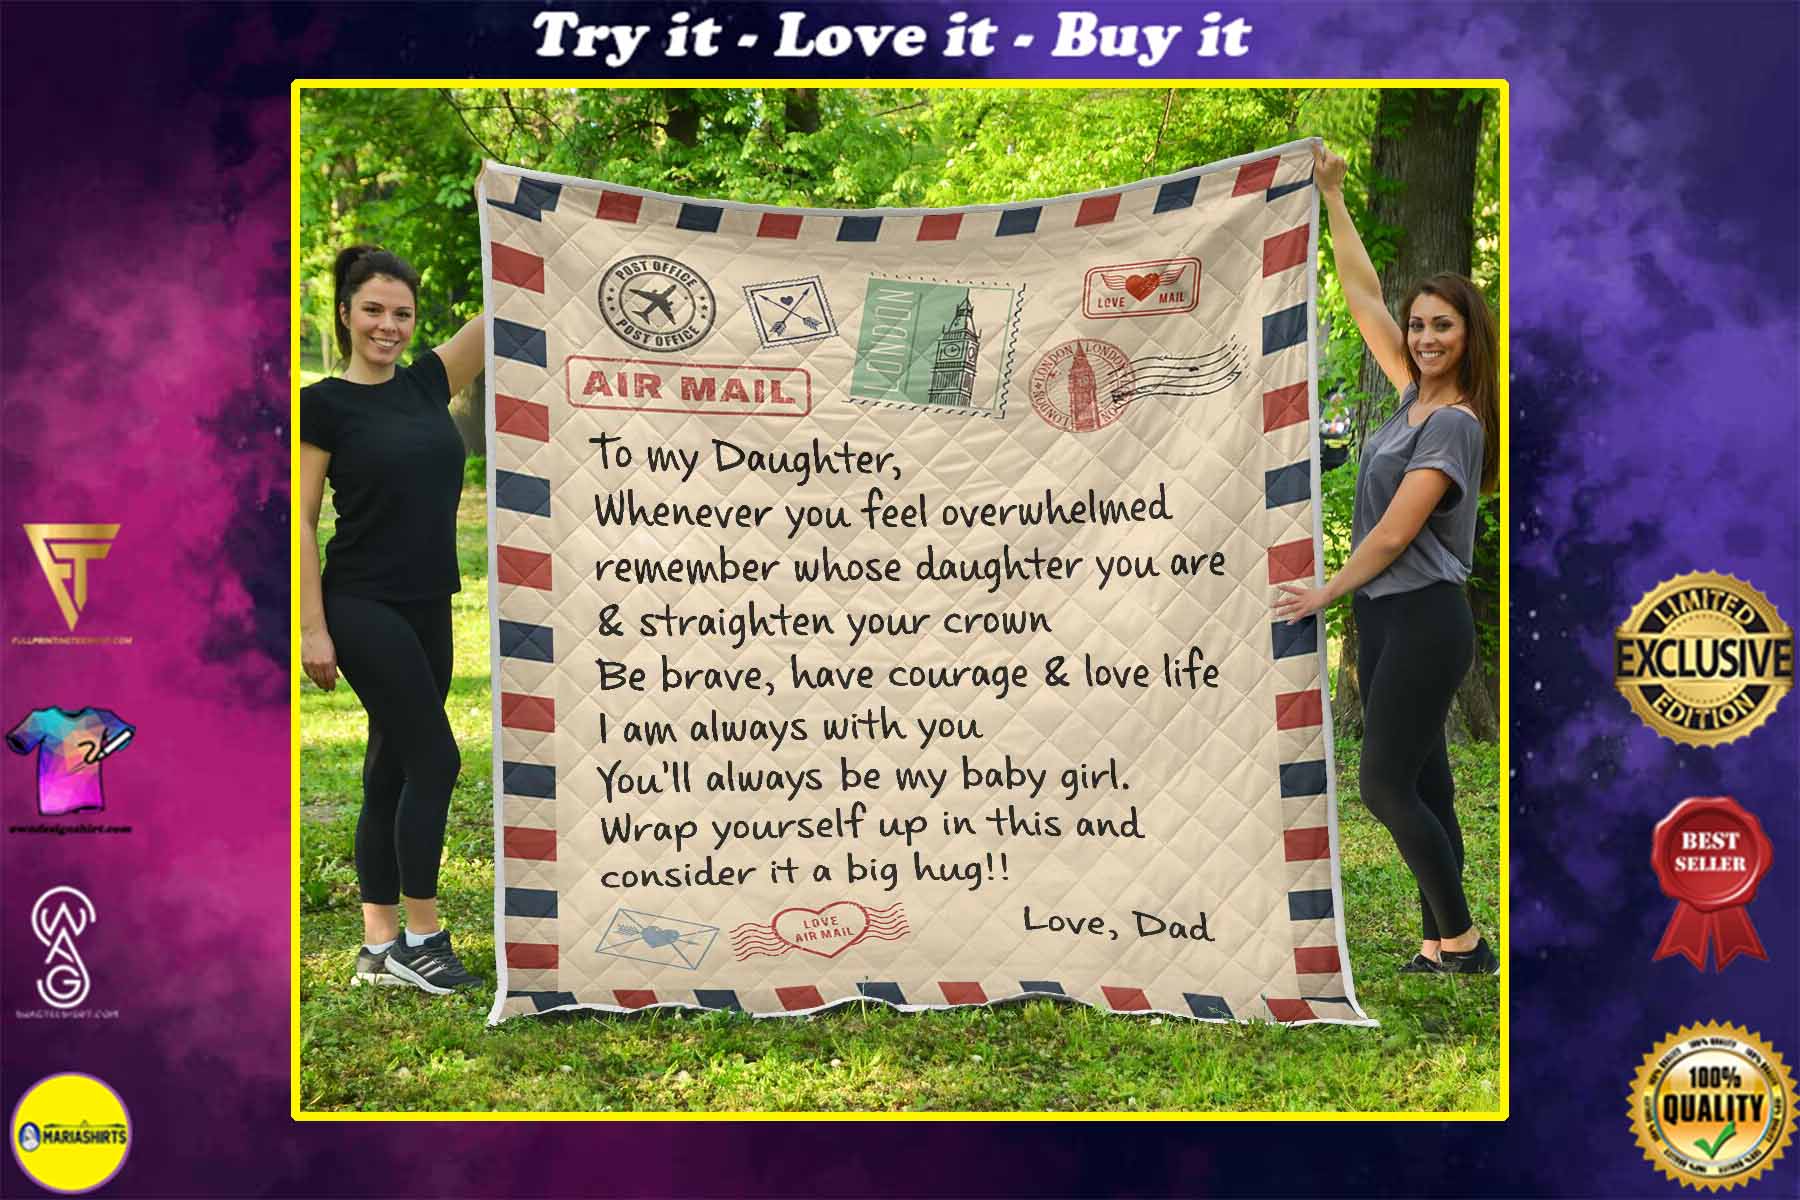 air mail letter to my daughter youll always be my baby girl your dad quilt